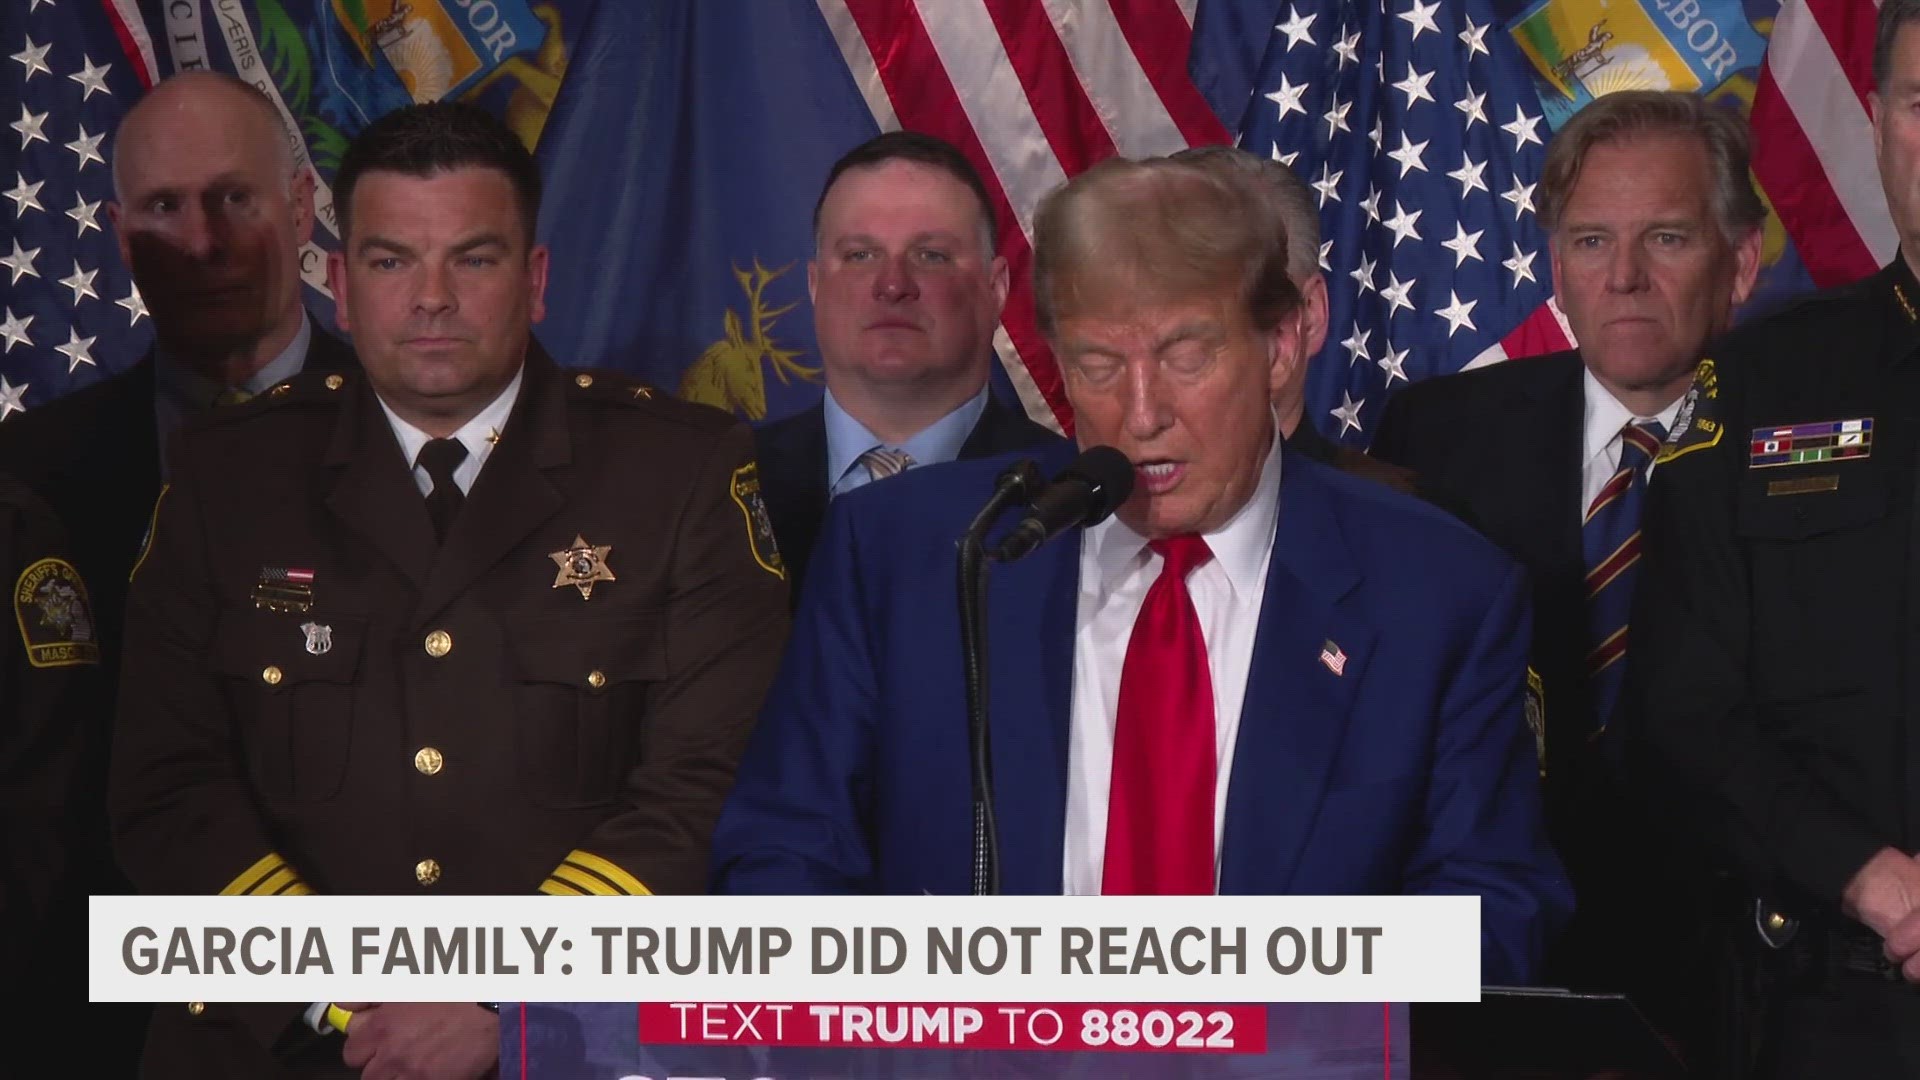 Trump claimed he spoke with family of Ruby Garcia, but they said he hasn't reached out to them.